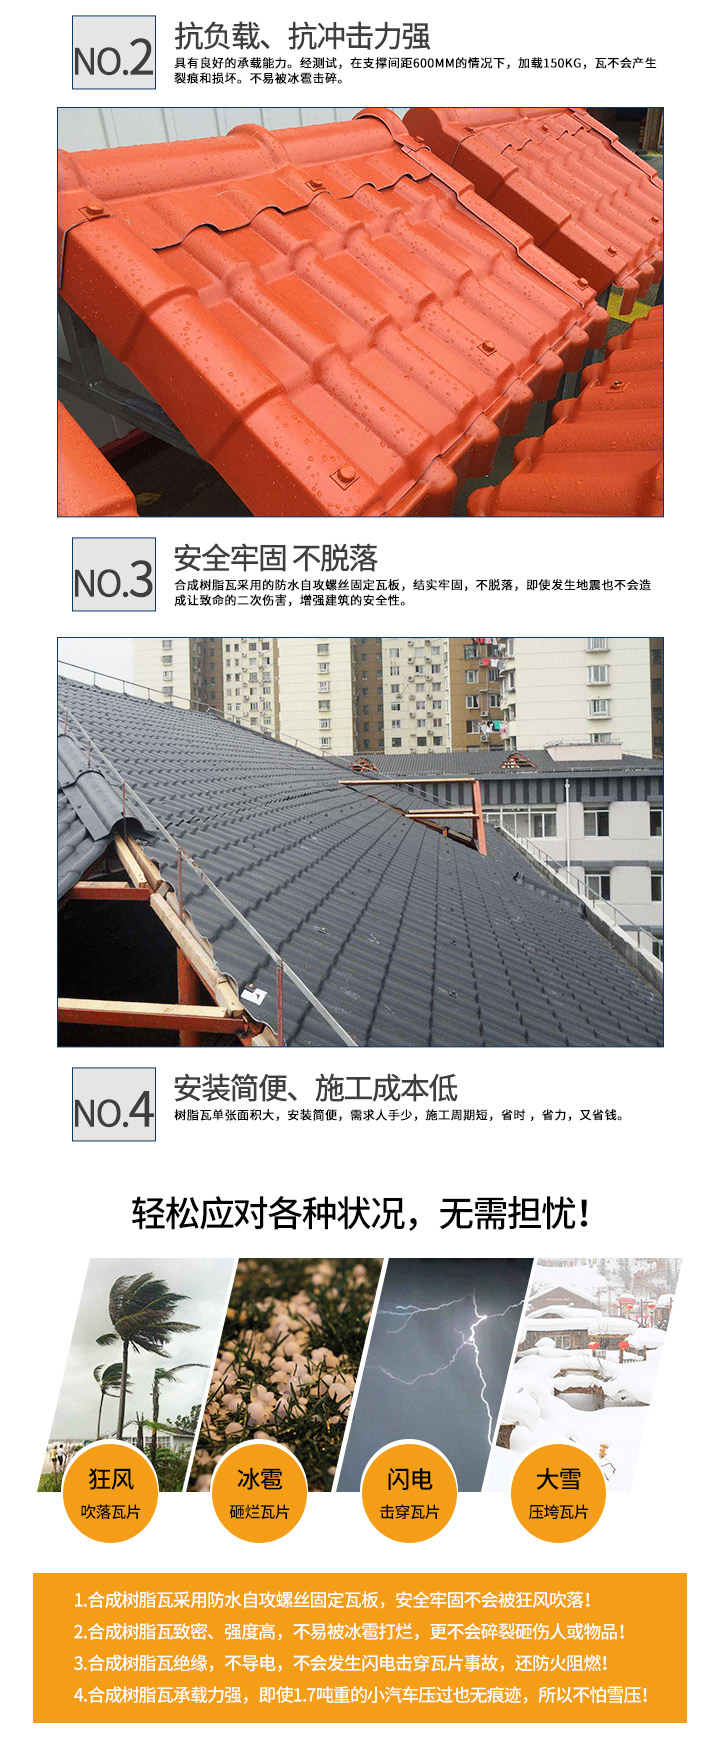 Introduction to the performance of ASA synthetic resin tile